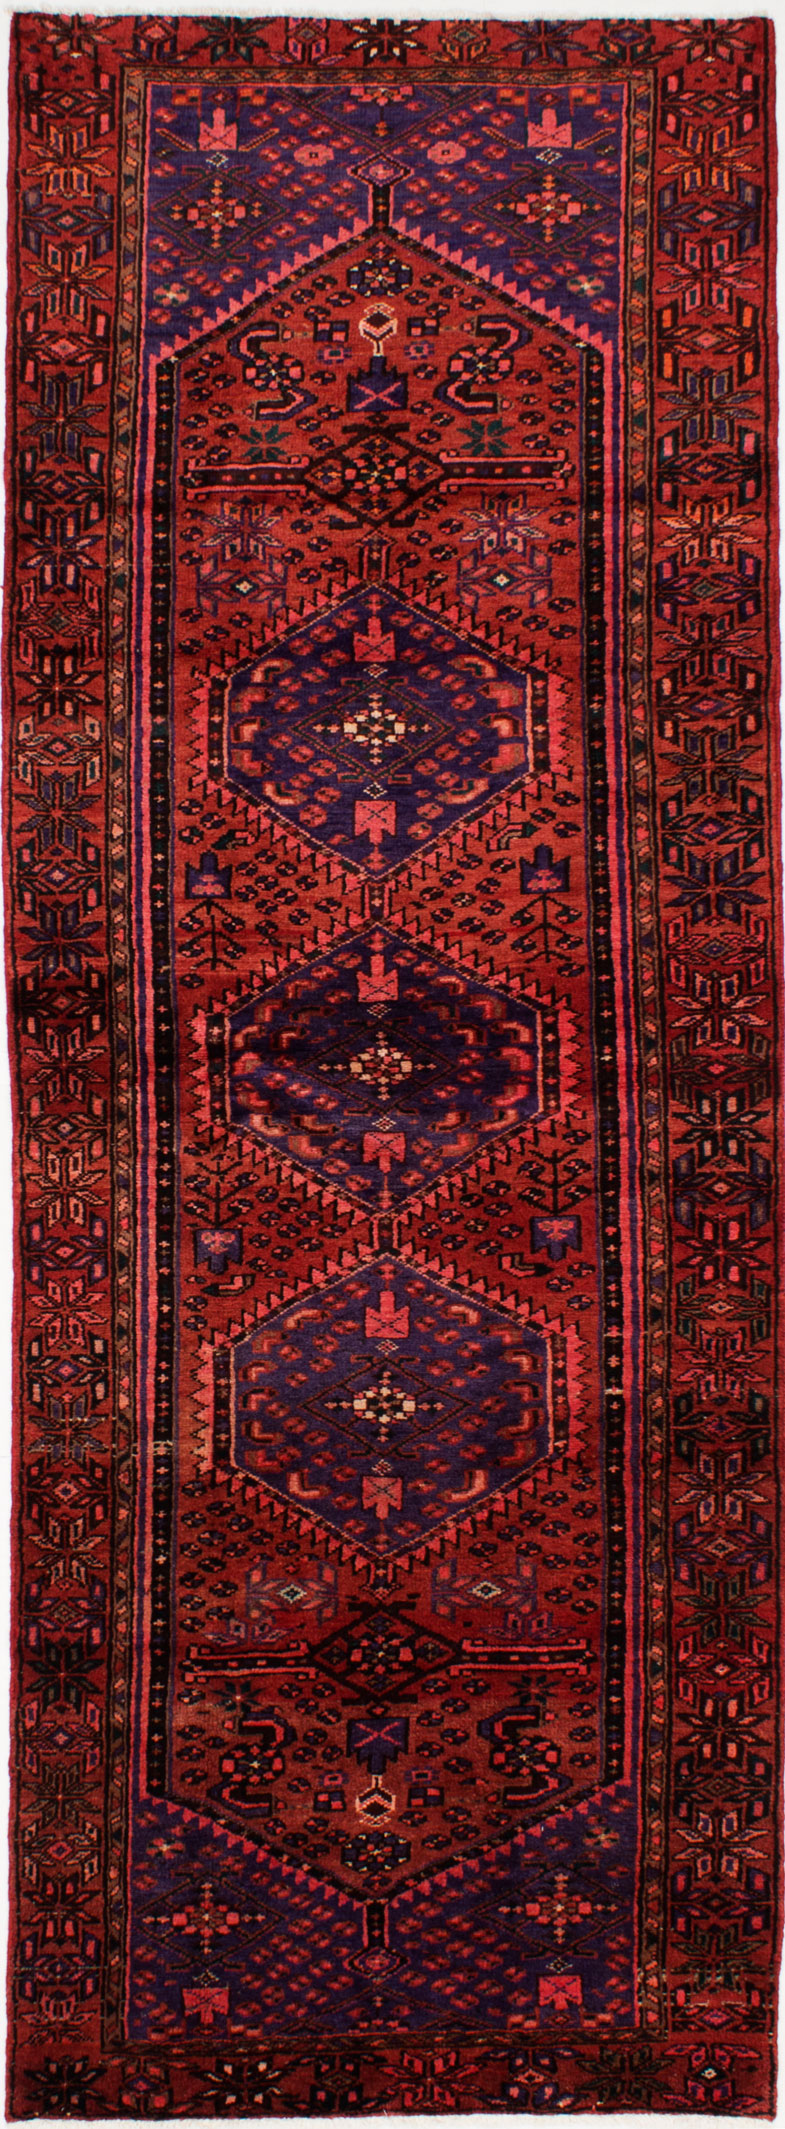 Hand-knotted Hamadan Red Wool Rug 3'10" x 10'6"  Size: 3'10" x 10'6"  